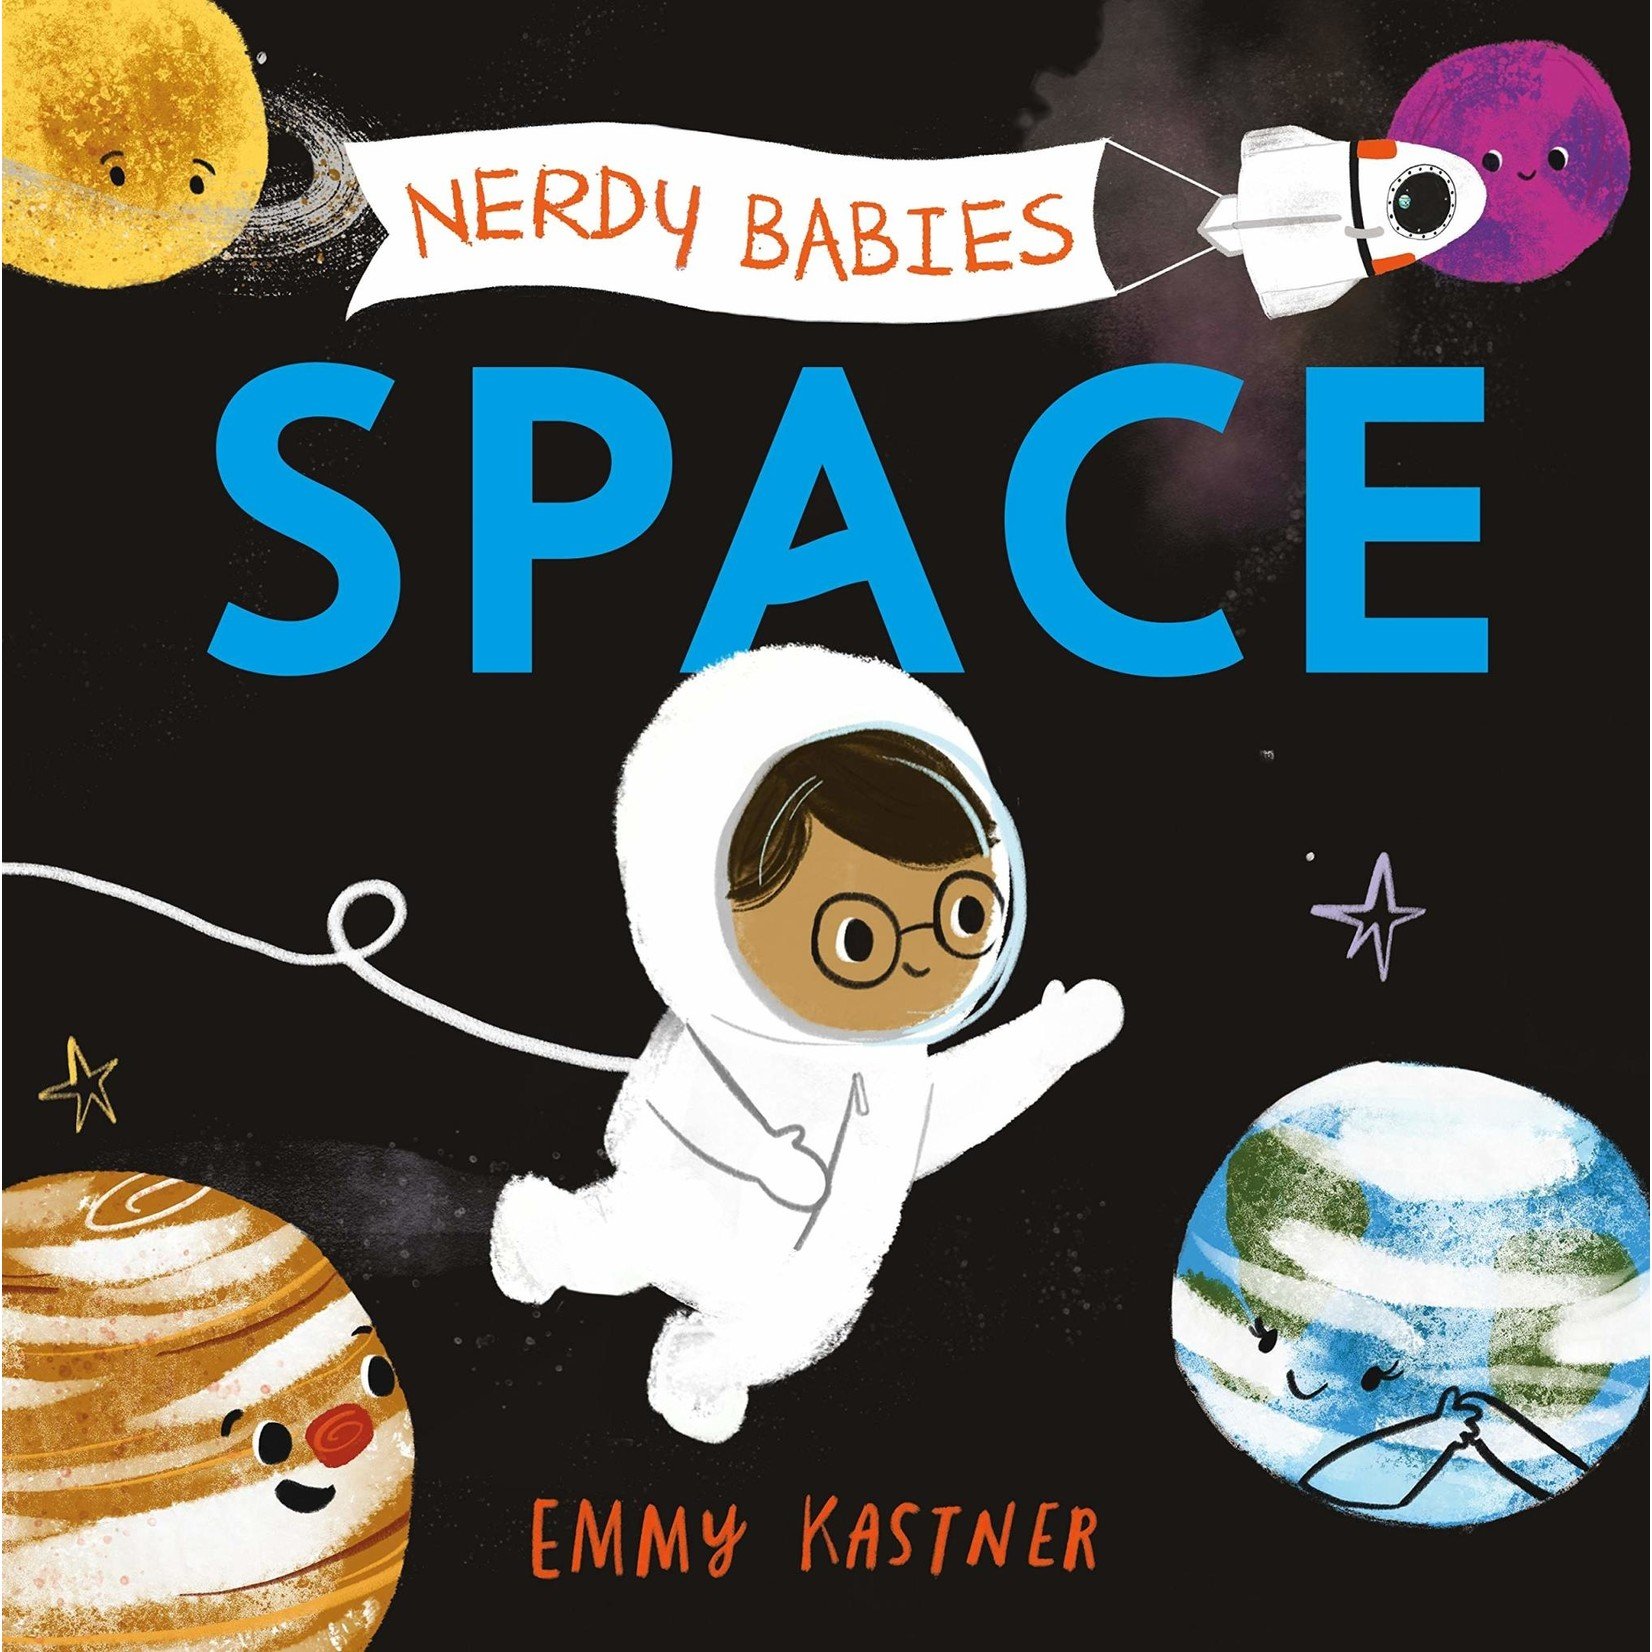 Science and Technology Nerdy Babies: Space